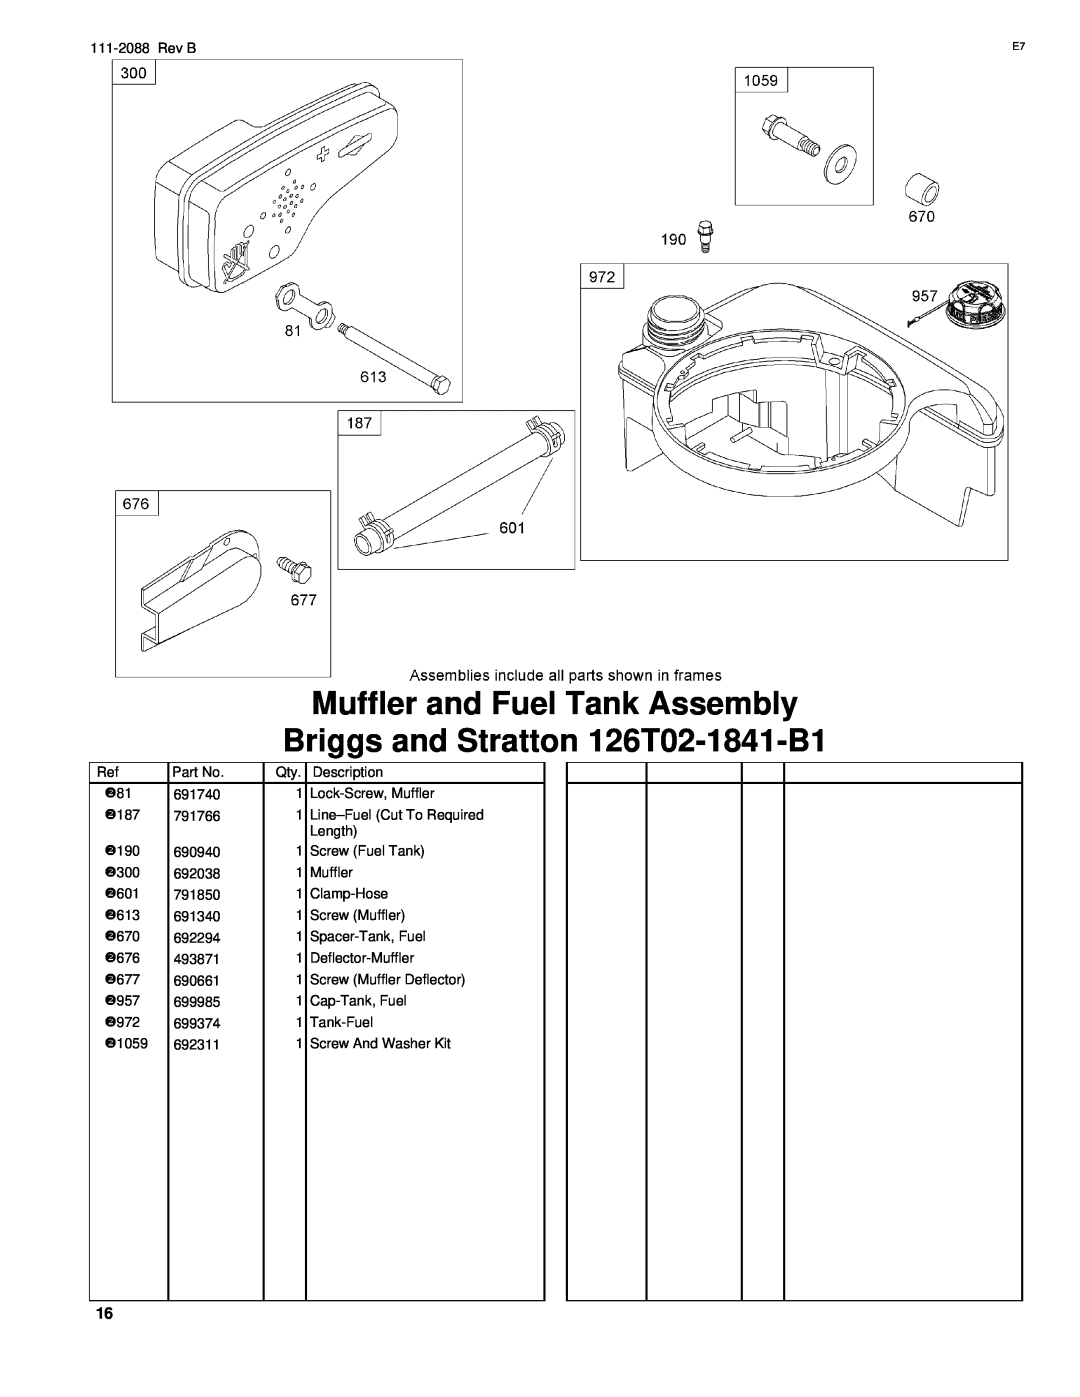 Hayter Mowers R48 manual Muffler and Fuel Tank Assembly, Briggs and Stratton 126T02-1841-B1 